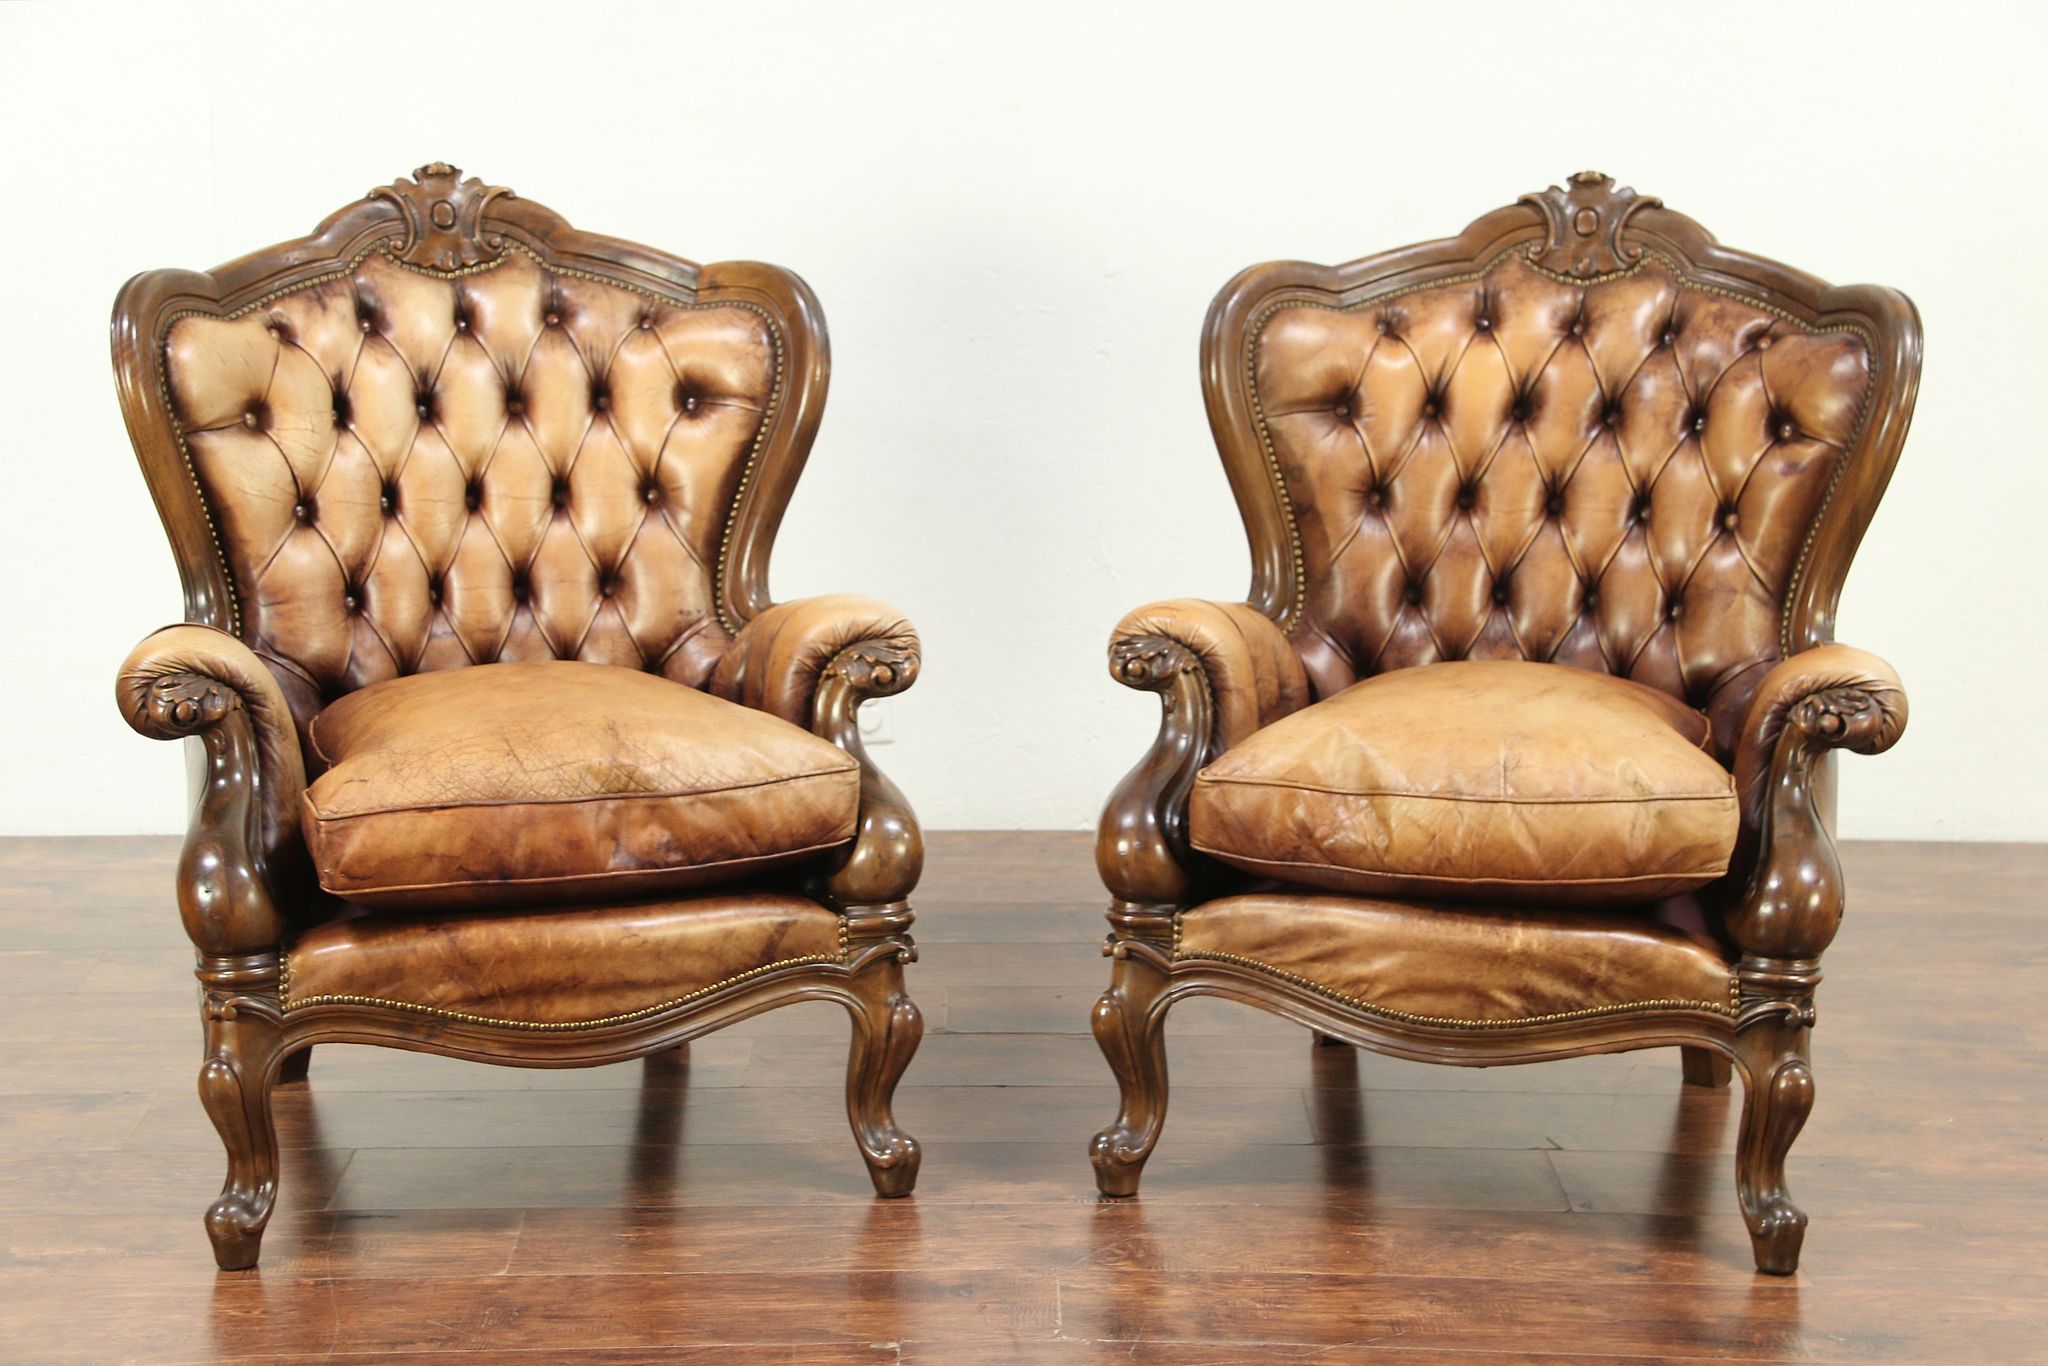 Pair Of Carved Fruitwood Wing Back, Antique Wooden Wingback Chair